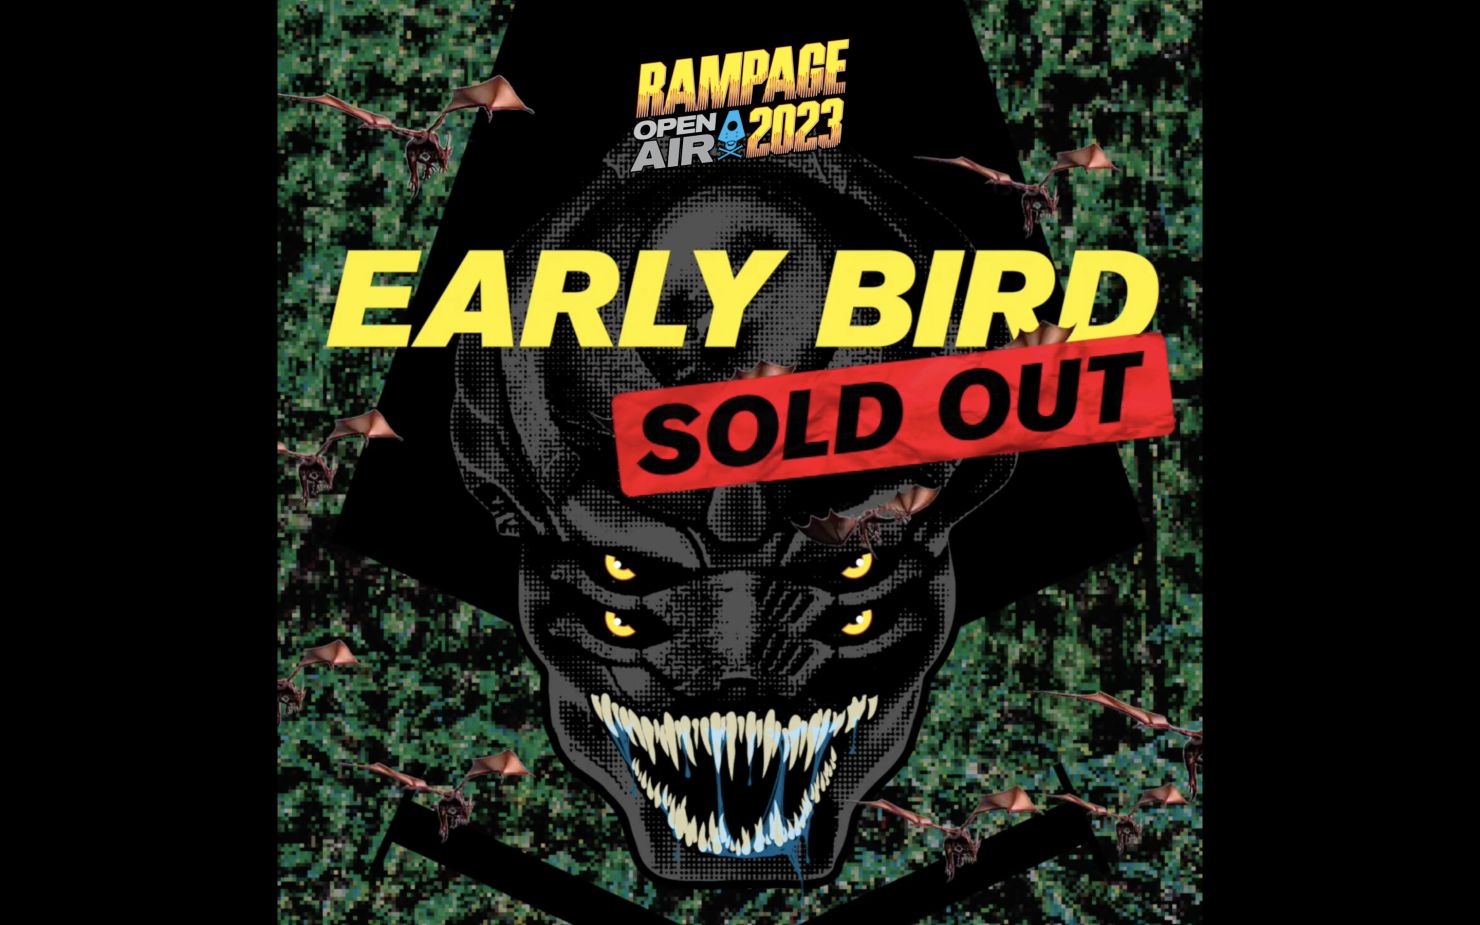 Early Bird Sold out! - Rampage Open Air 2023